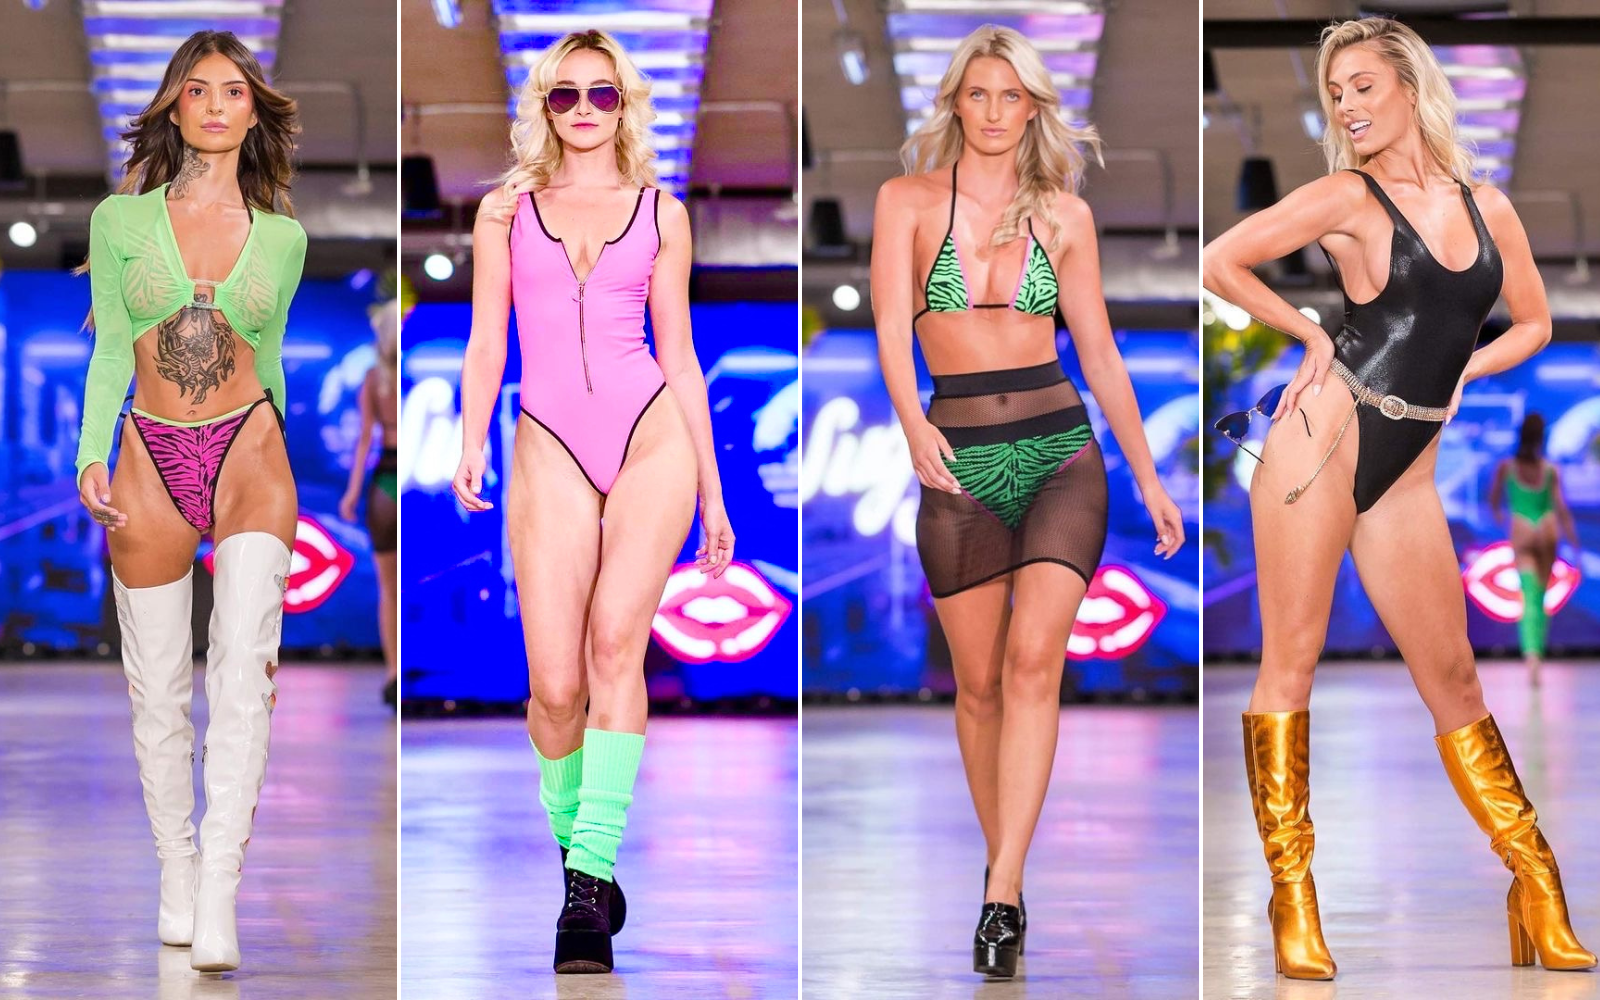 Sugarpuss on the runway wearing: NEON BIKINI WITH TRIANGLE TOP AND HIGHCUT STRING BOTTOMS IN PINK ZEBRA, Sporty One-Piece Zip Up Suit in Neon Pink, NEON BIKINI WITH TRIANGLE TOP AND HIGHCUT THONG BOTTOMS IN LIME GREEN ZEBRA, HOLOGRAM HIGHCUT SIDEBOOB ONE PIECE IN BLACK